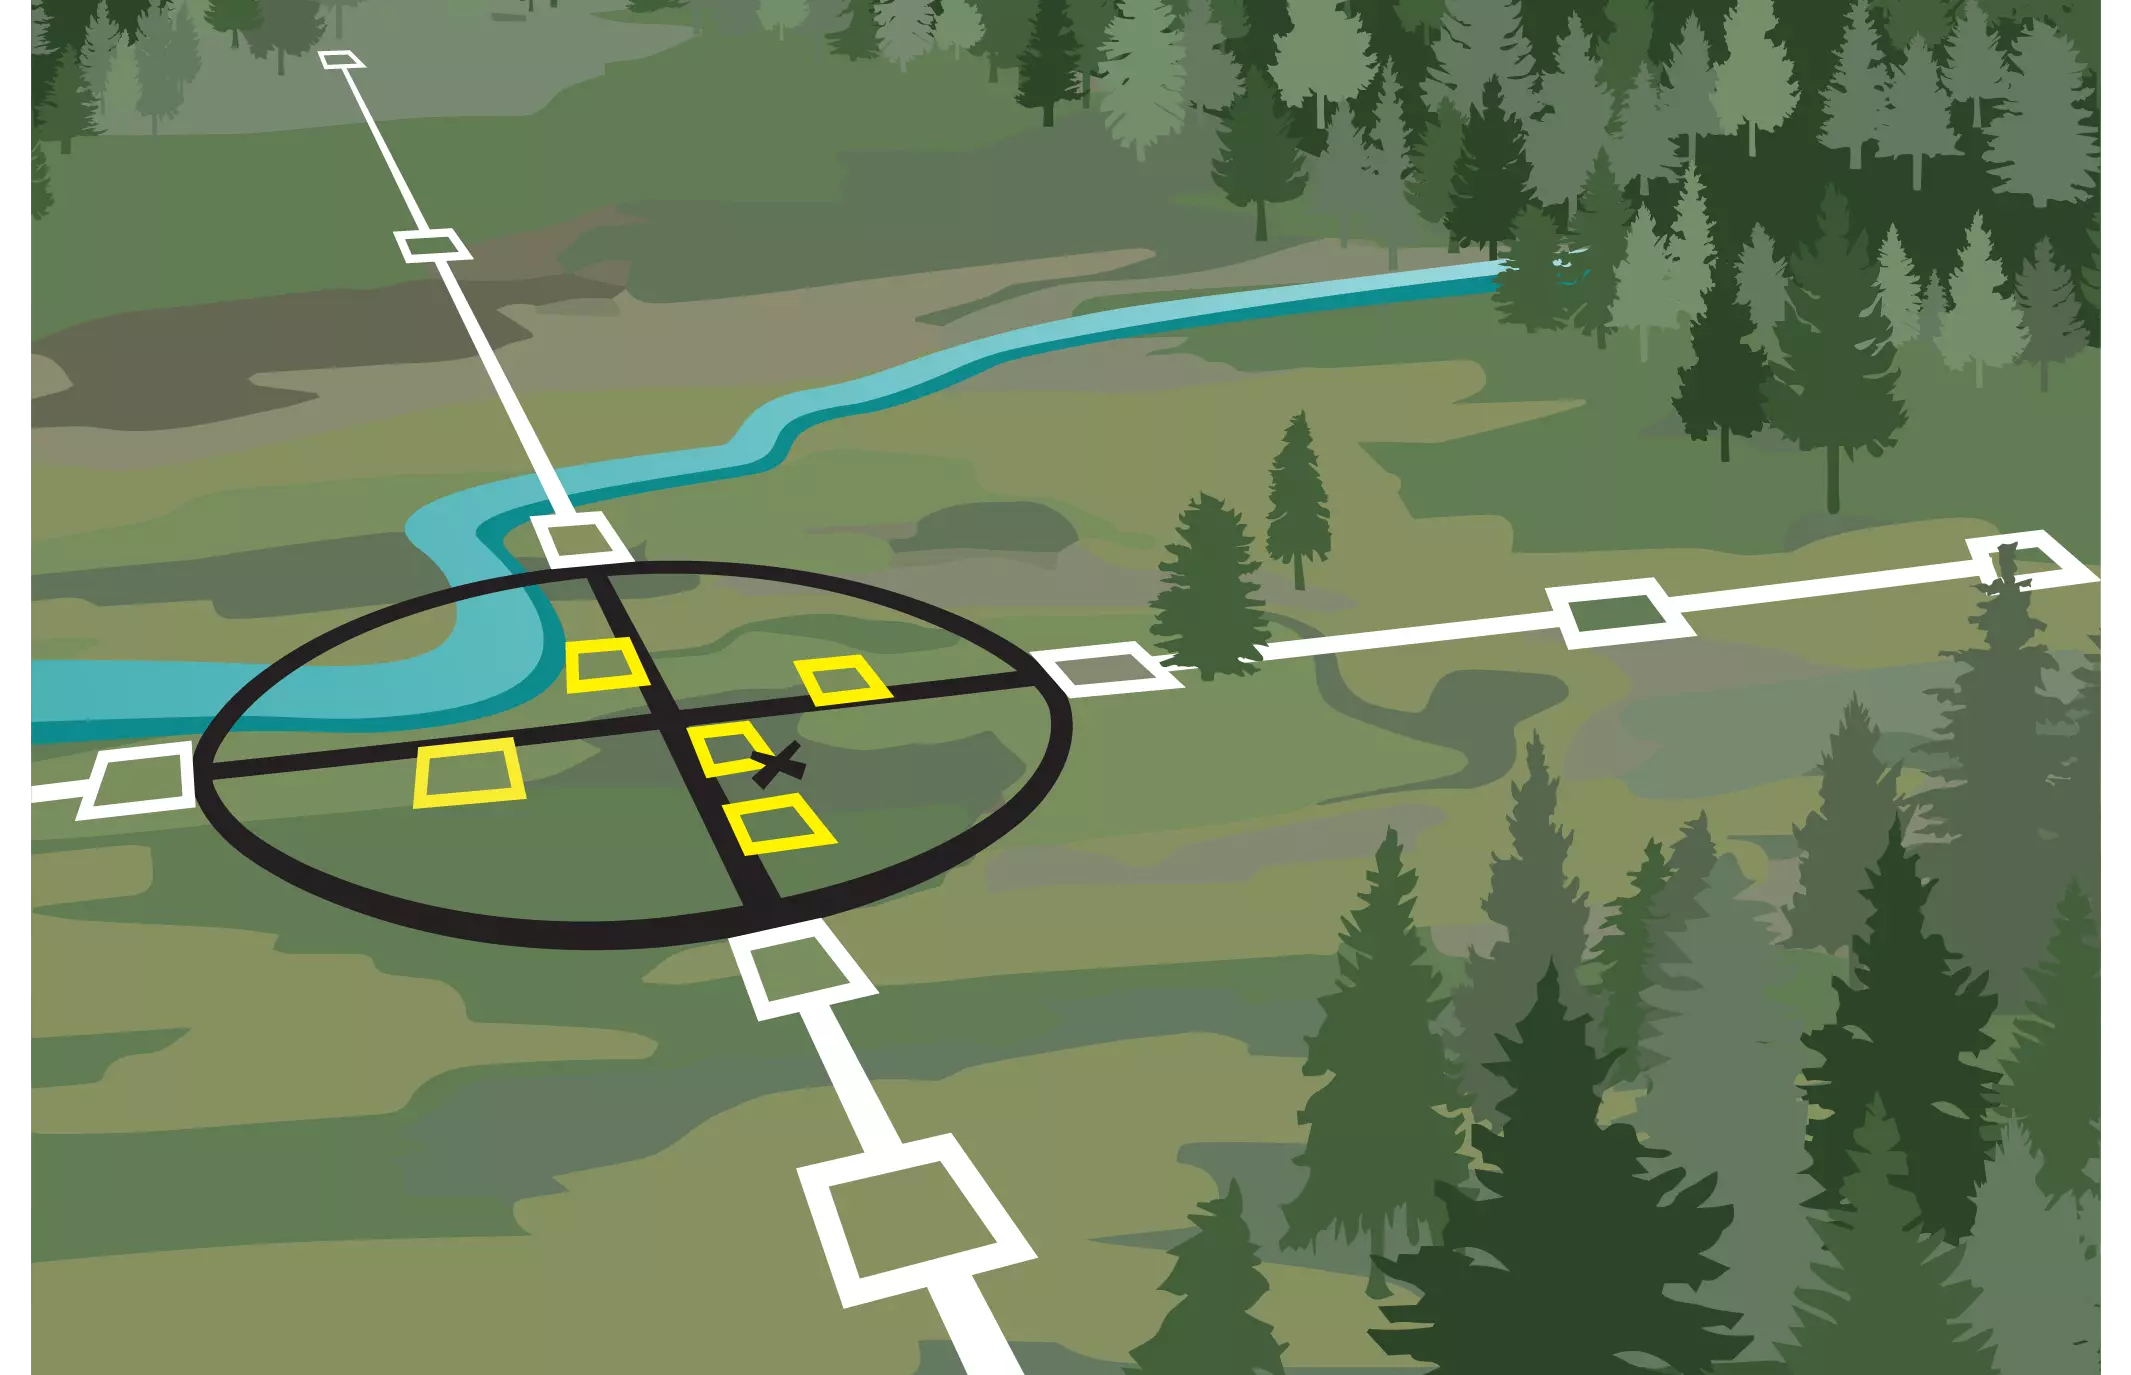 Diagram of assessment area overlaid on an alpine wetland.